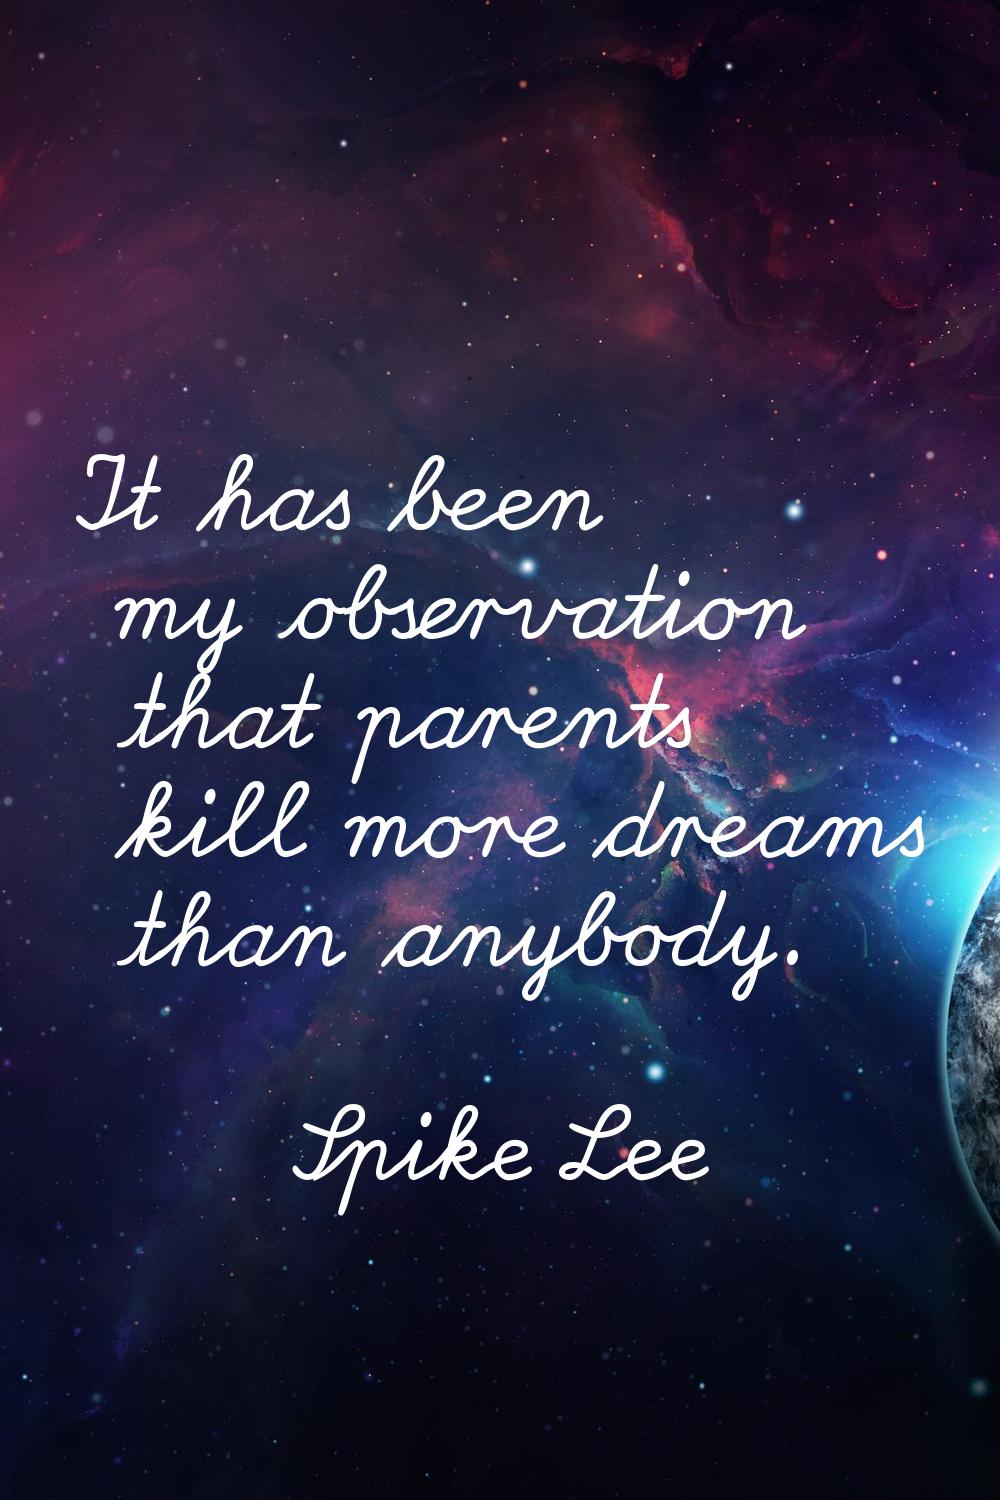 It has been my observation that parents kill more dreams than anybody.